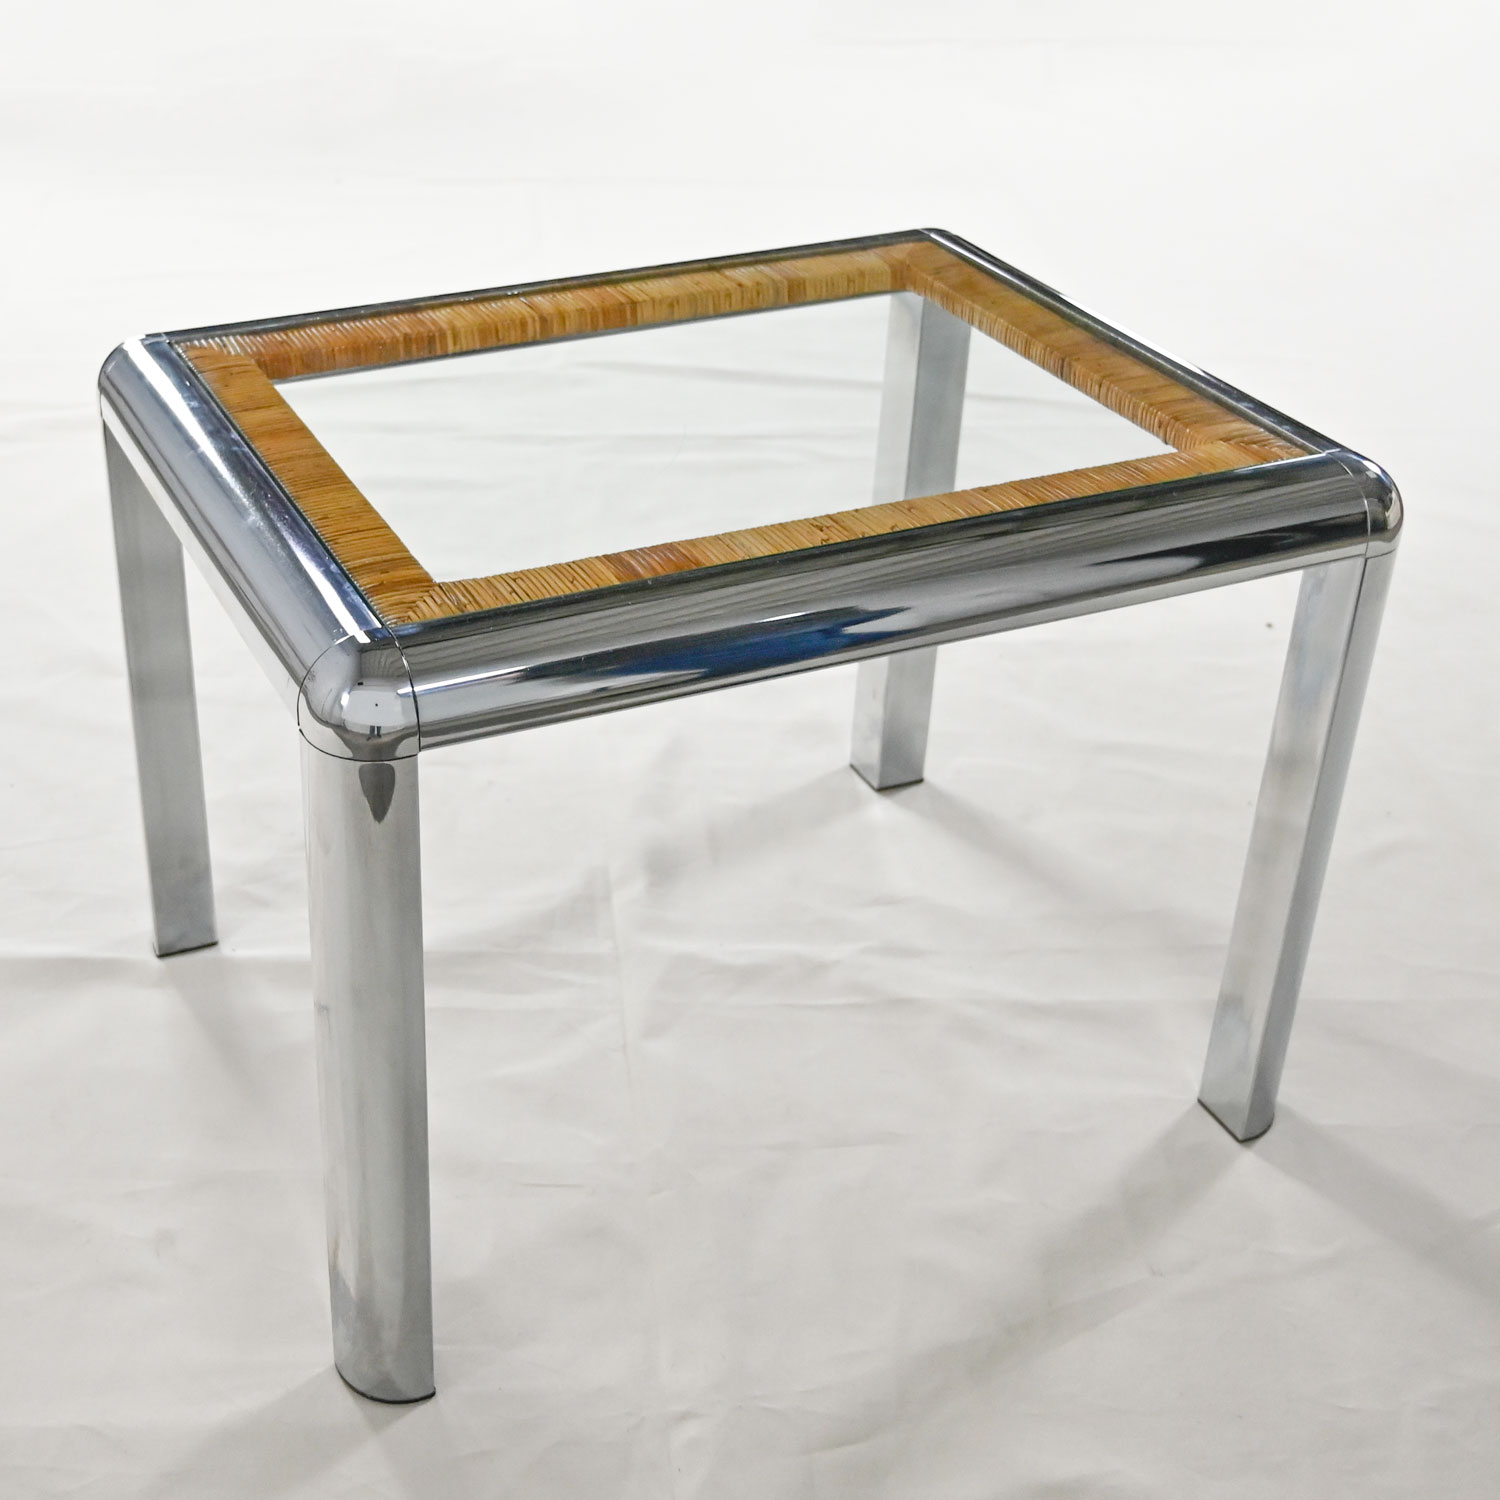 Vintage Modern Rectangular Chrome Glass & Wrapped Rattan Side Table Attributed to DIA